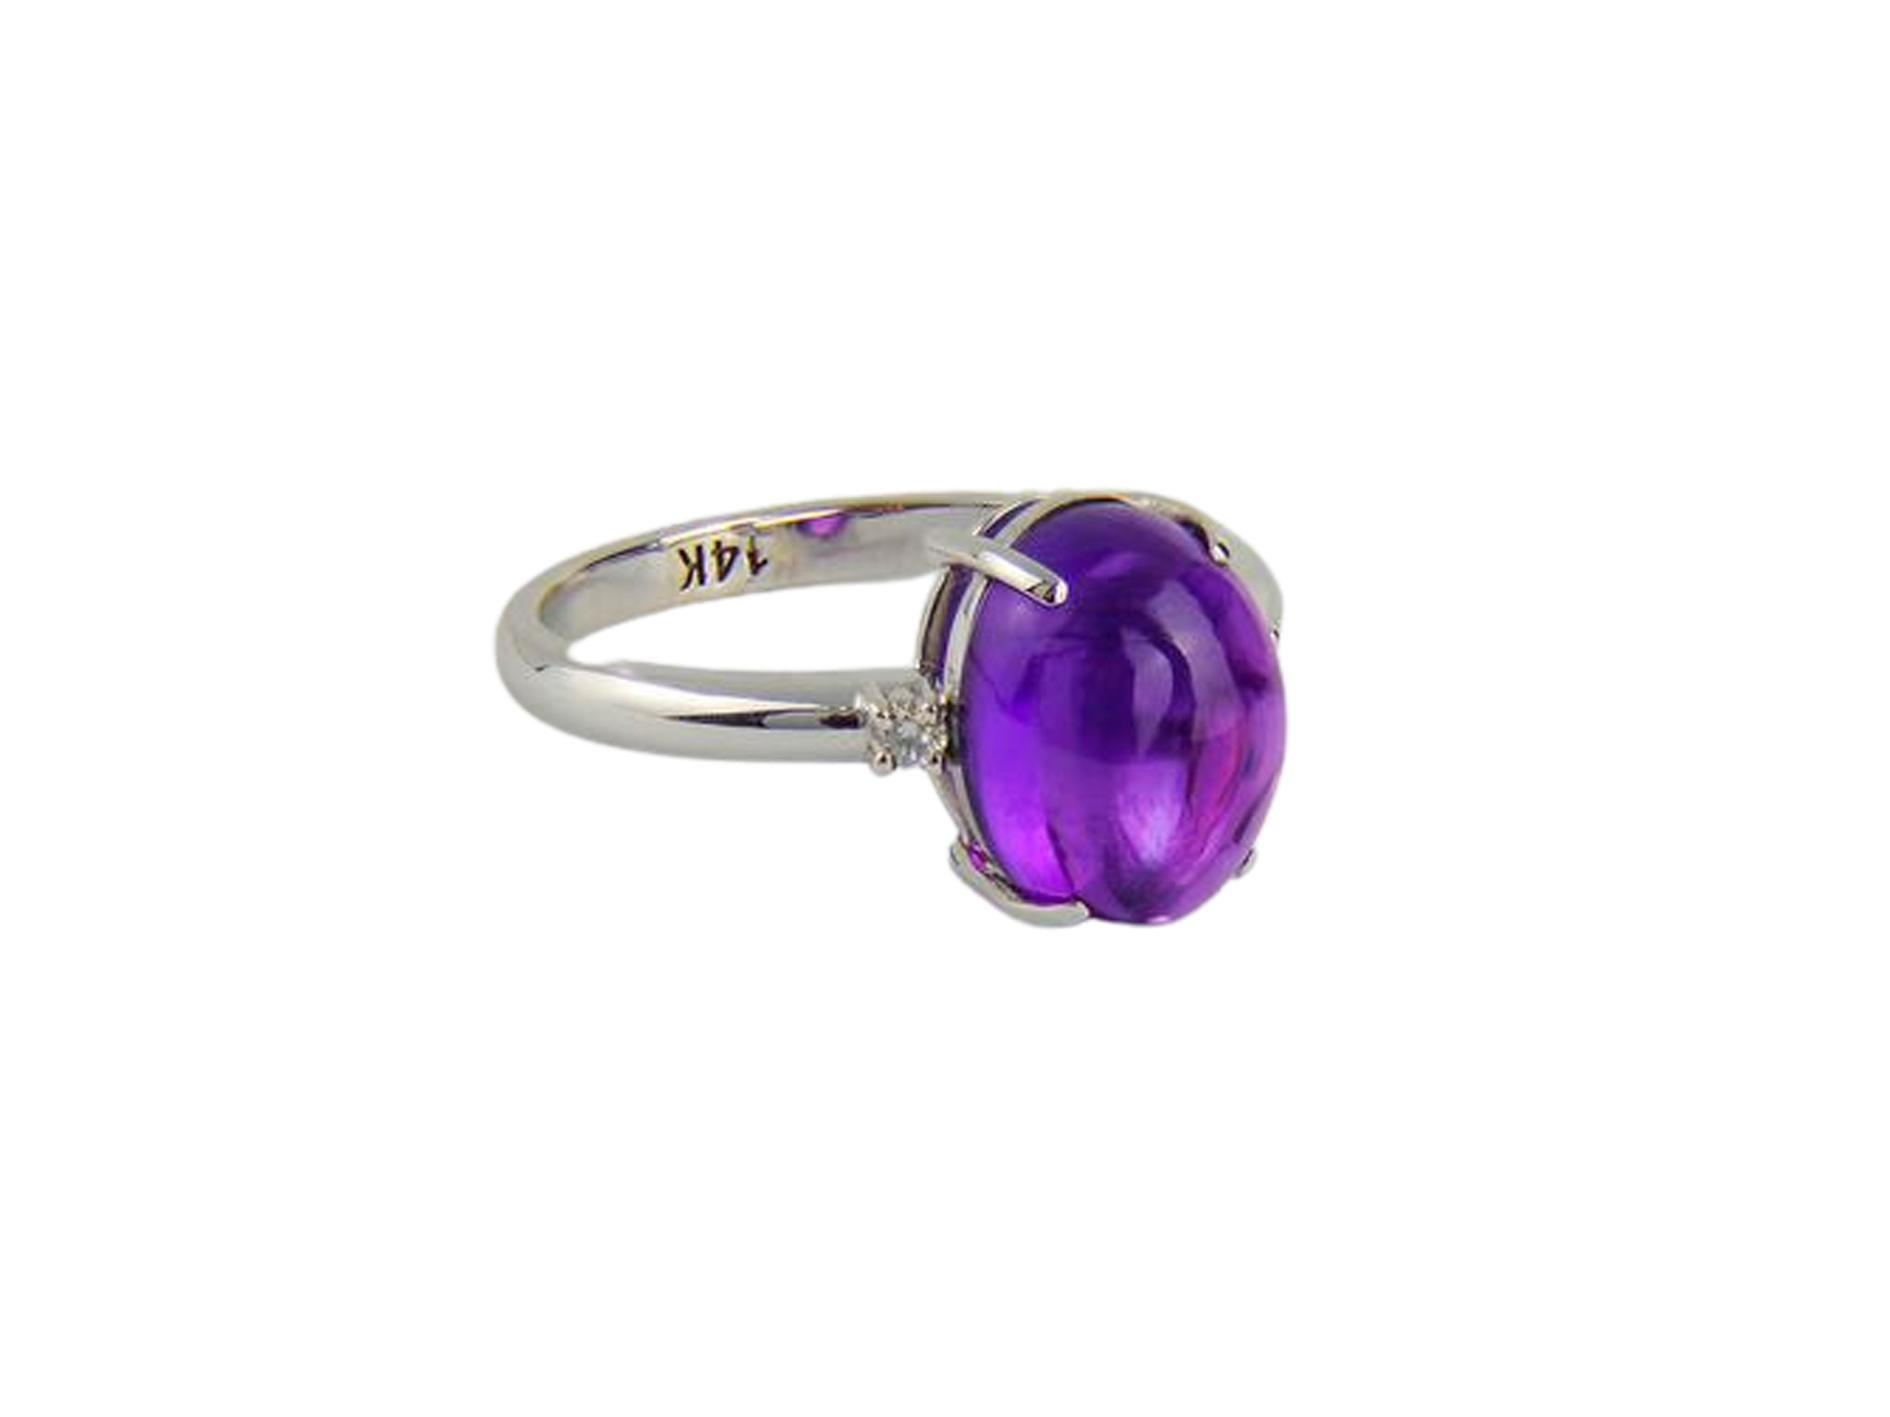 Women's 14 K Gold Minimalism Style Ring with Natural Amethyst Cabochon and Diamonds